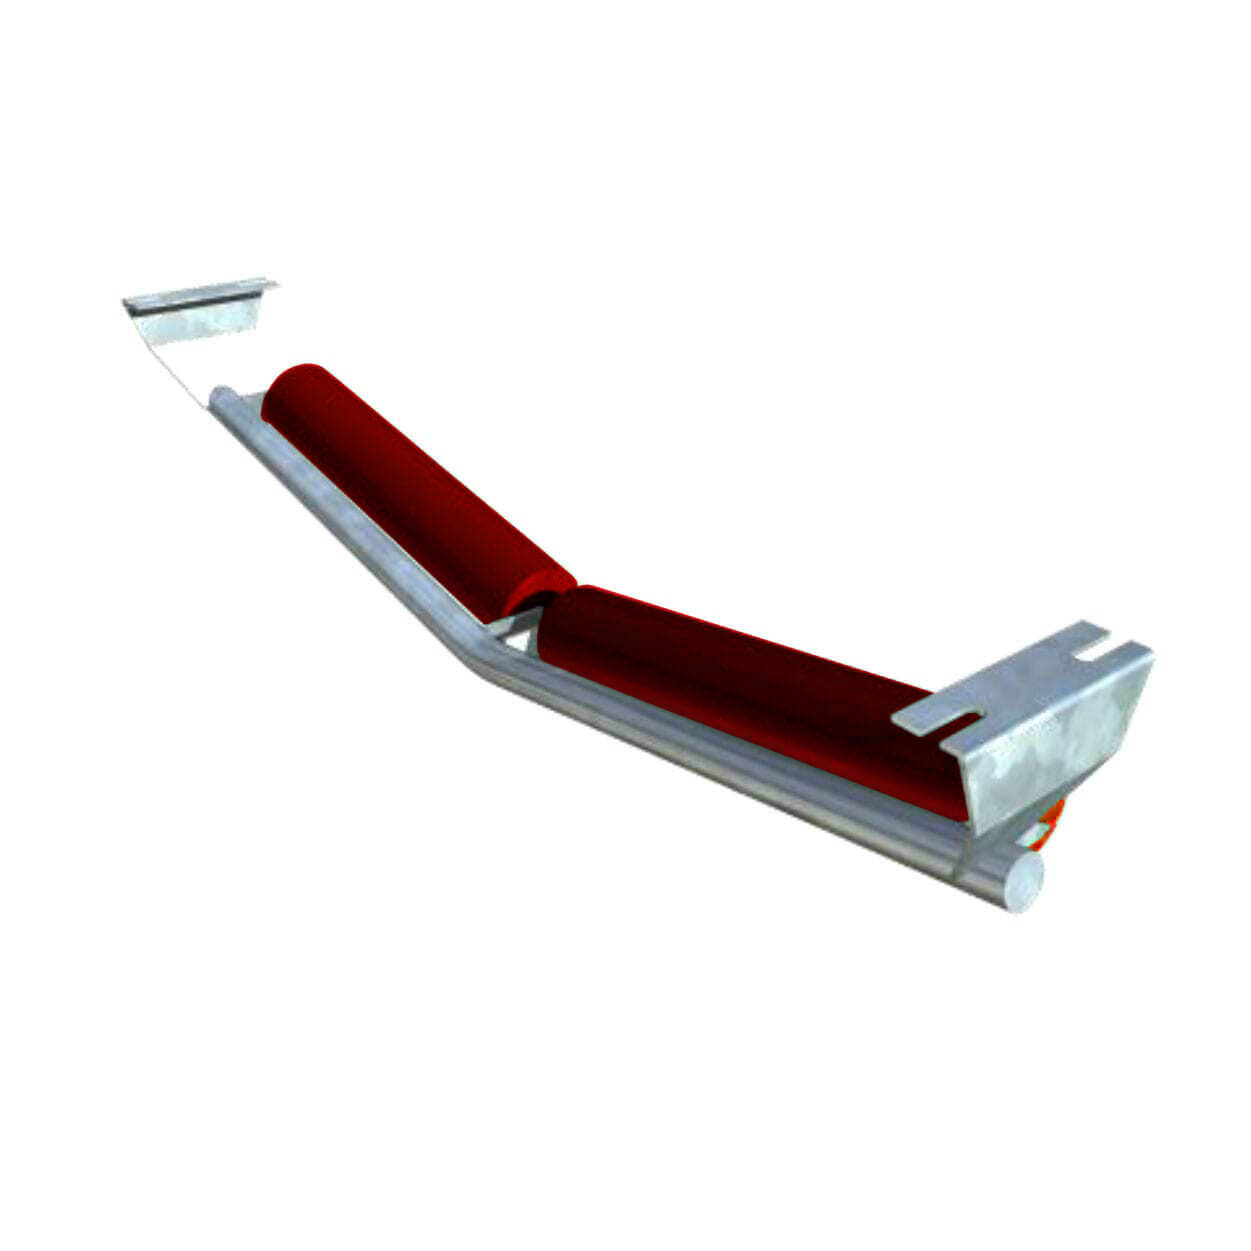 A conveyor belt idler with three red rollers attached to a metal frame, designed as versatile Troughing Idlers.